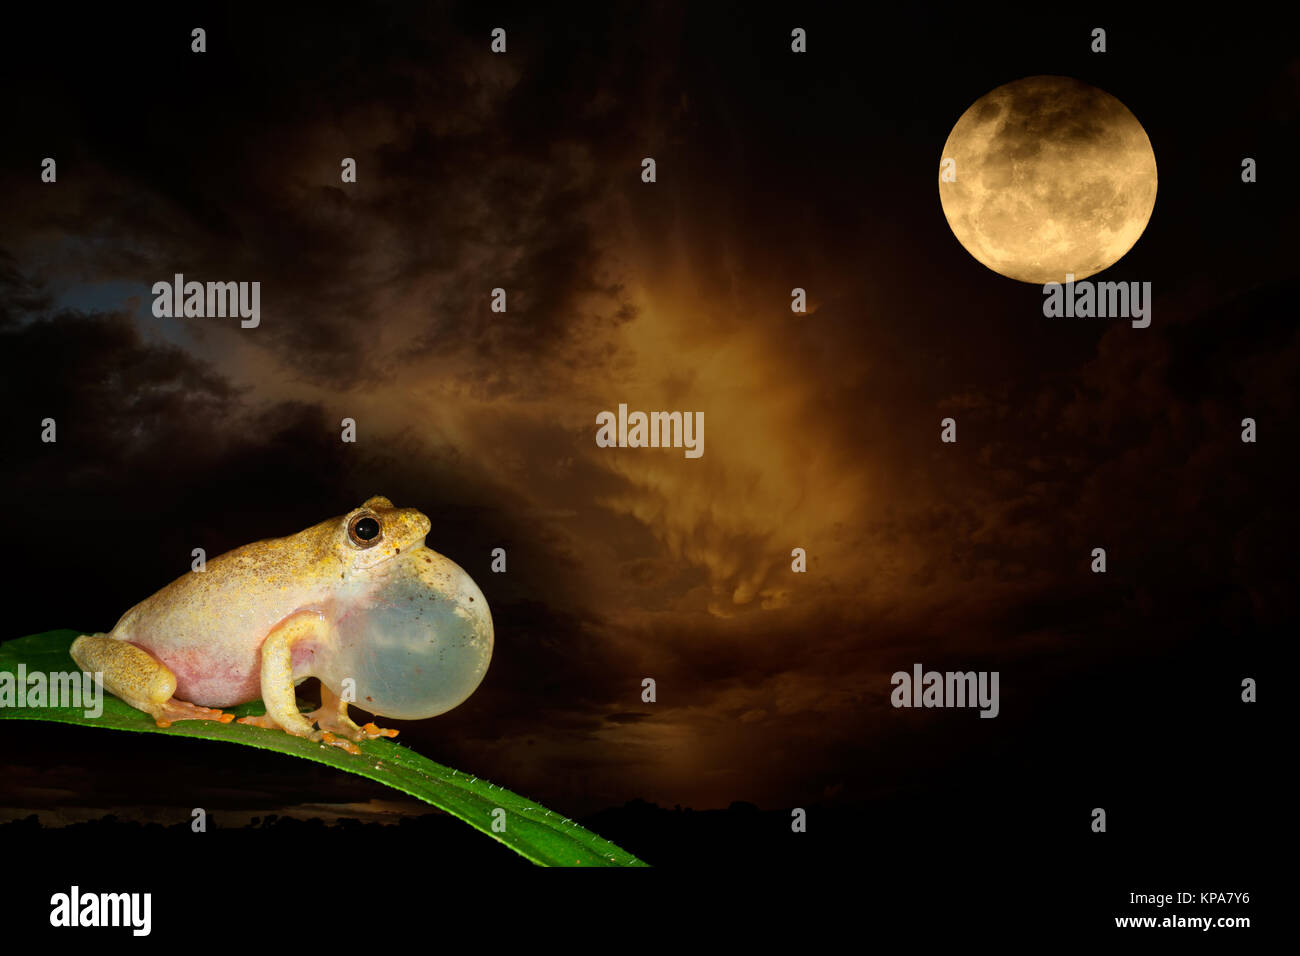 Painted reed frog and moon Stock Photo